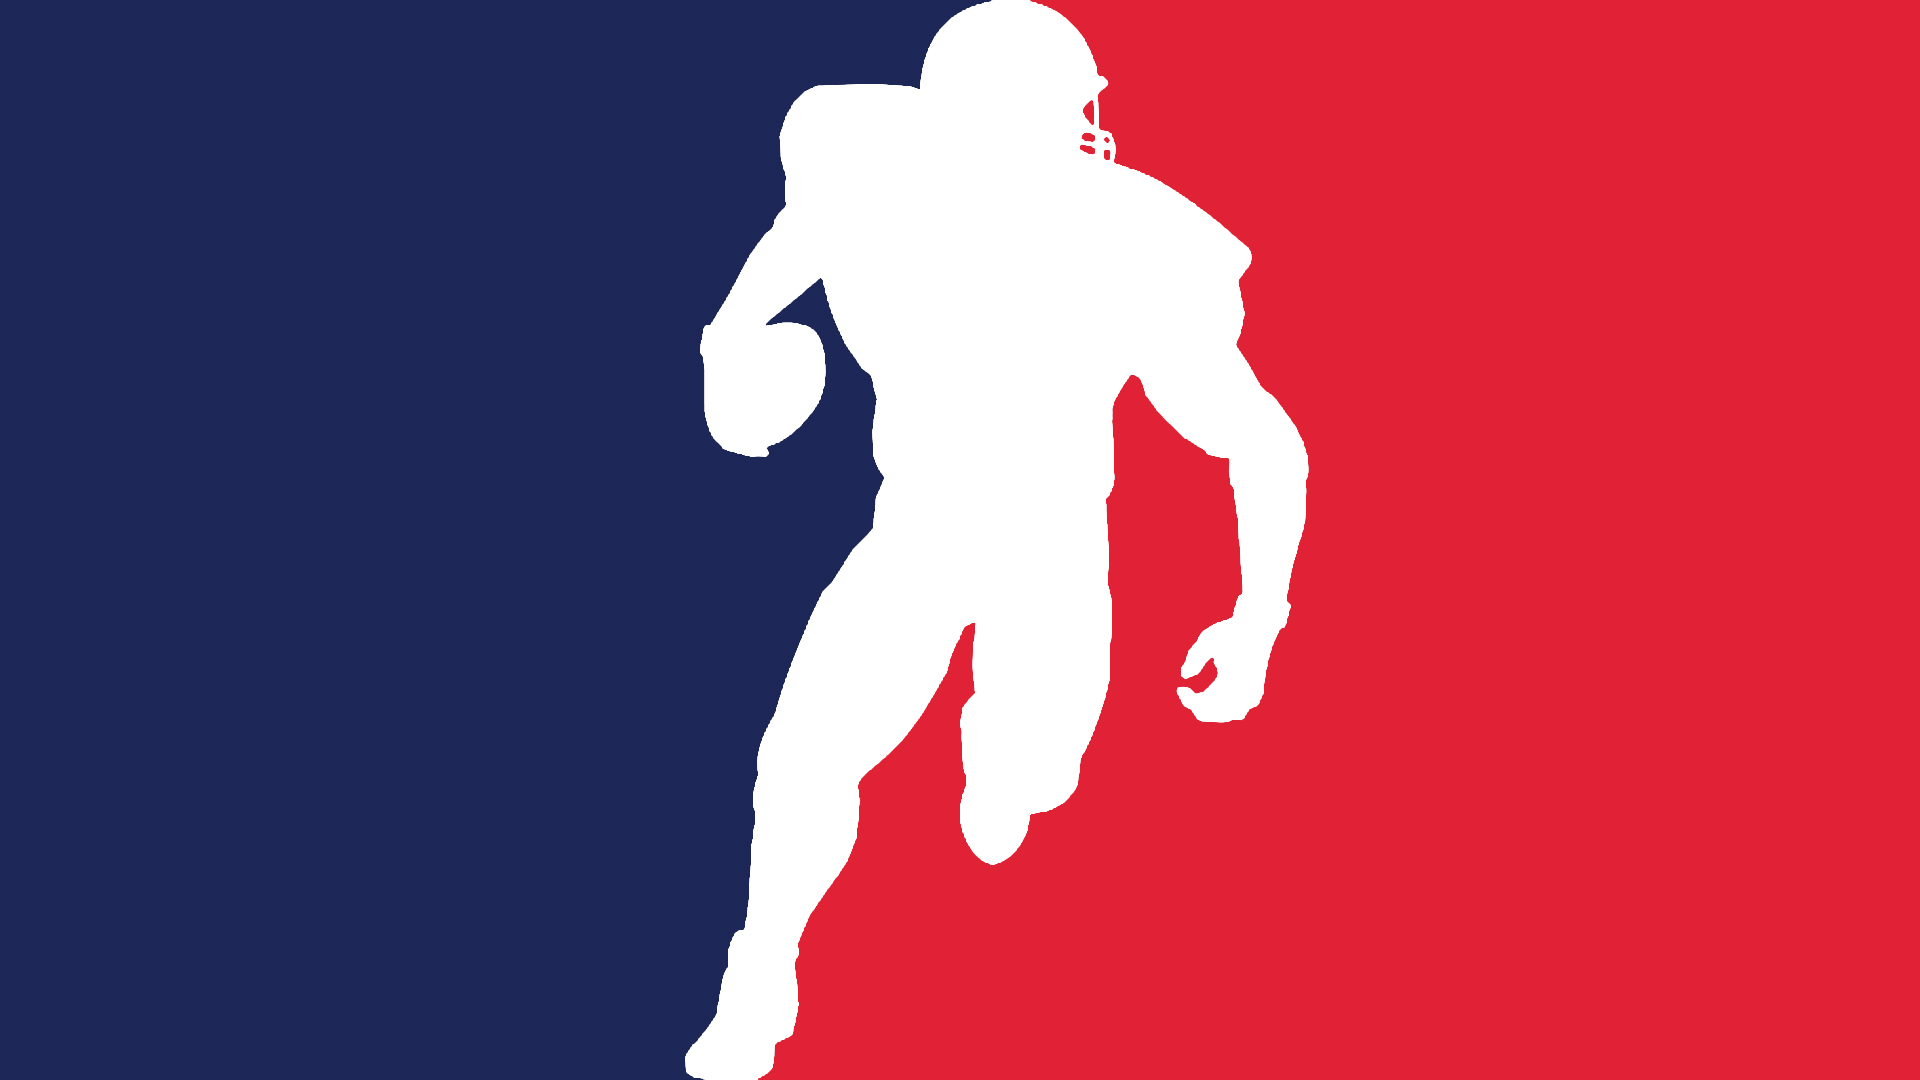 NFL Background Wallpapers 